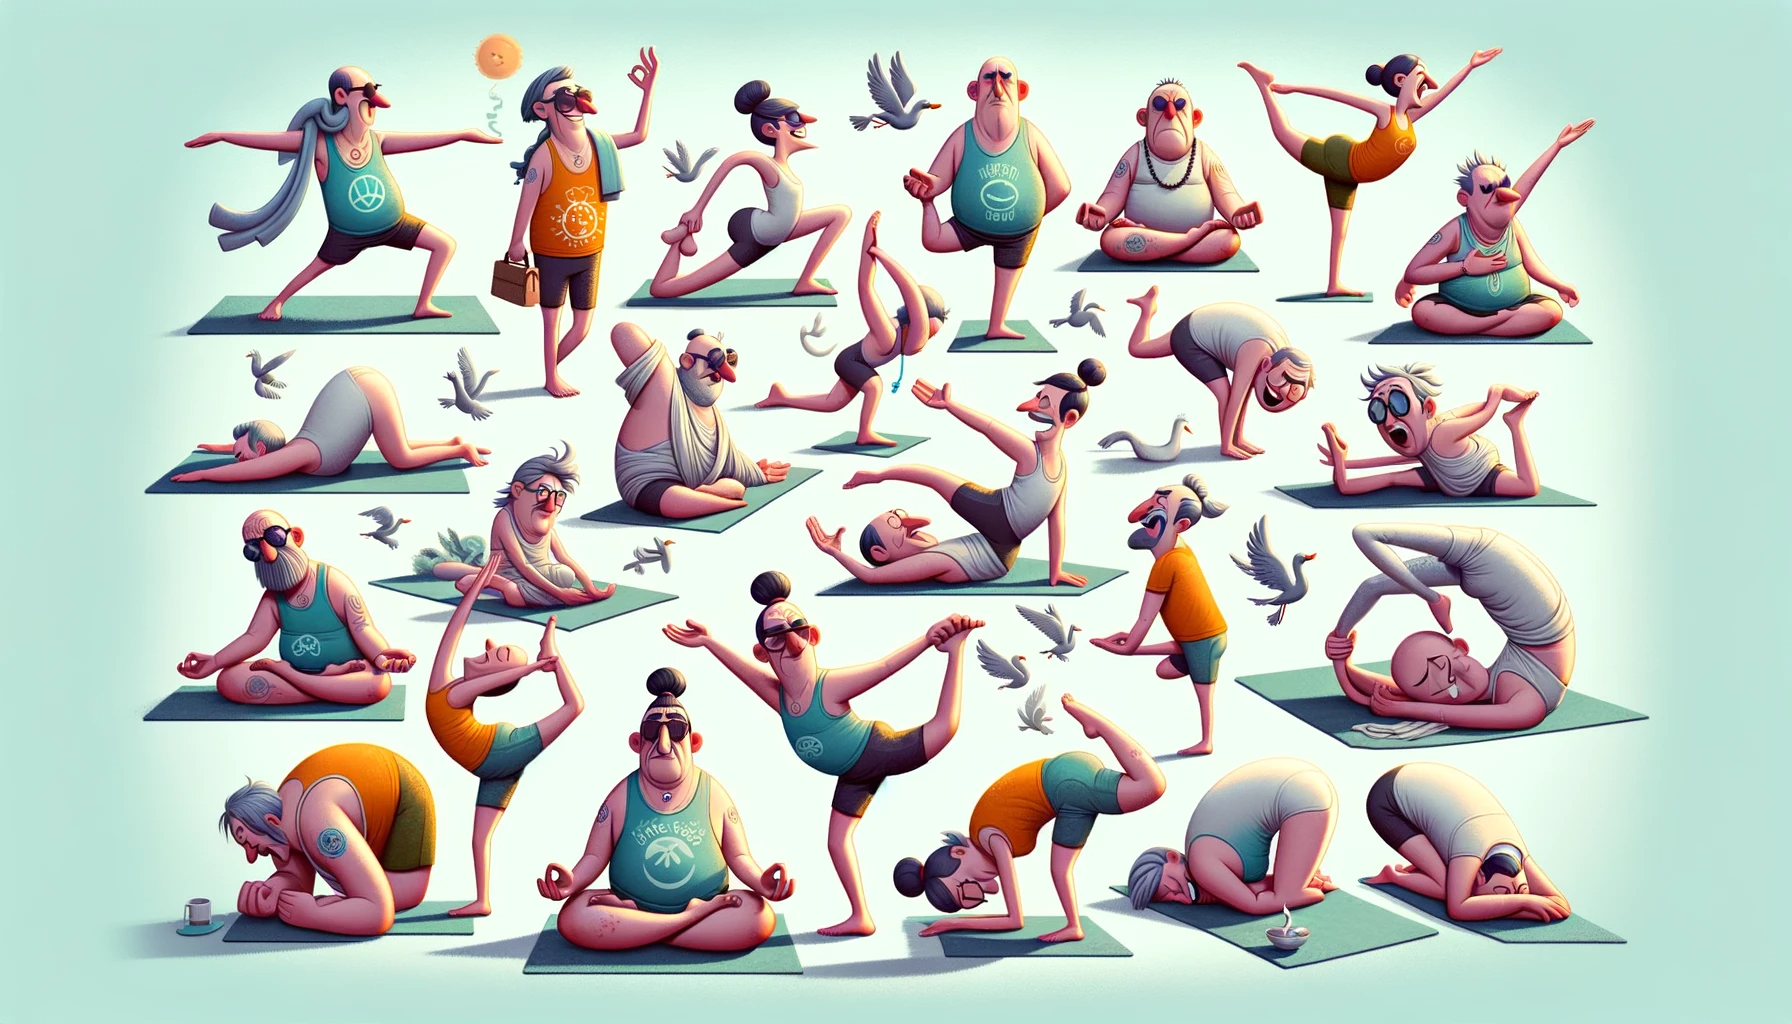 various yoga poses in a playful, cartoonish style, with each character embodying a humorous exaggeration of typical yoga stereotypes, all set against a light, serene background